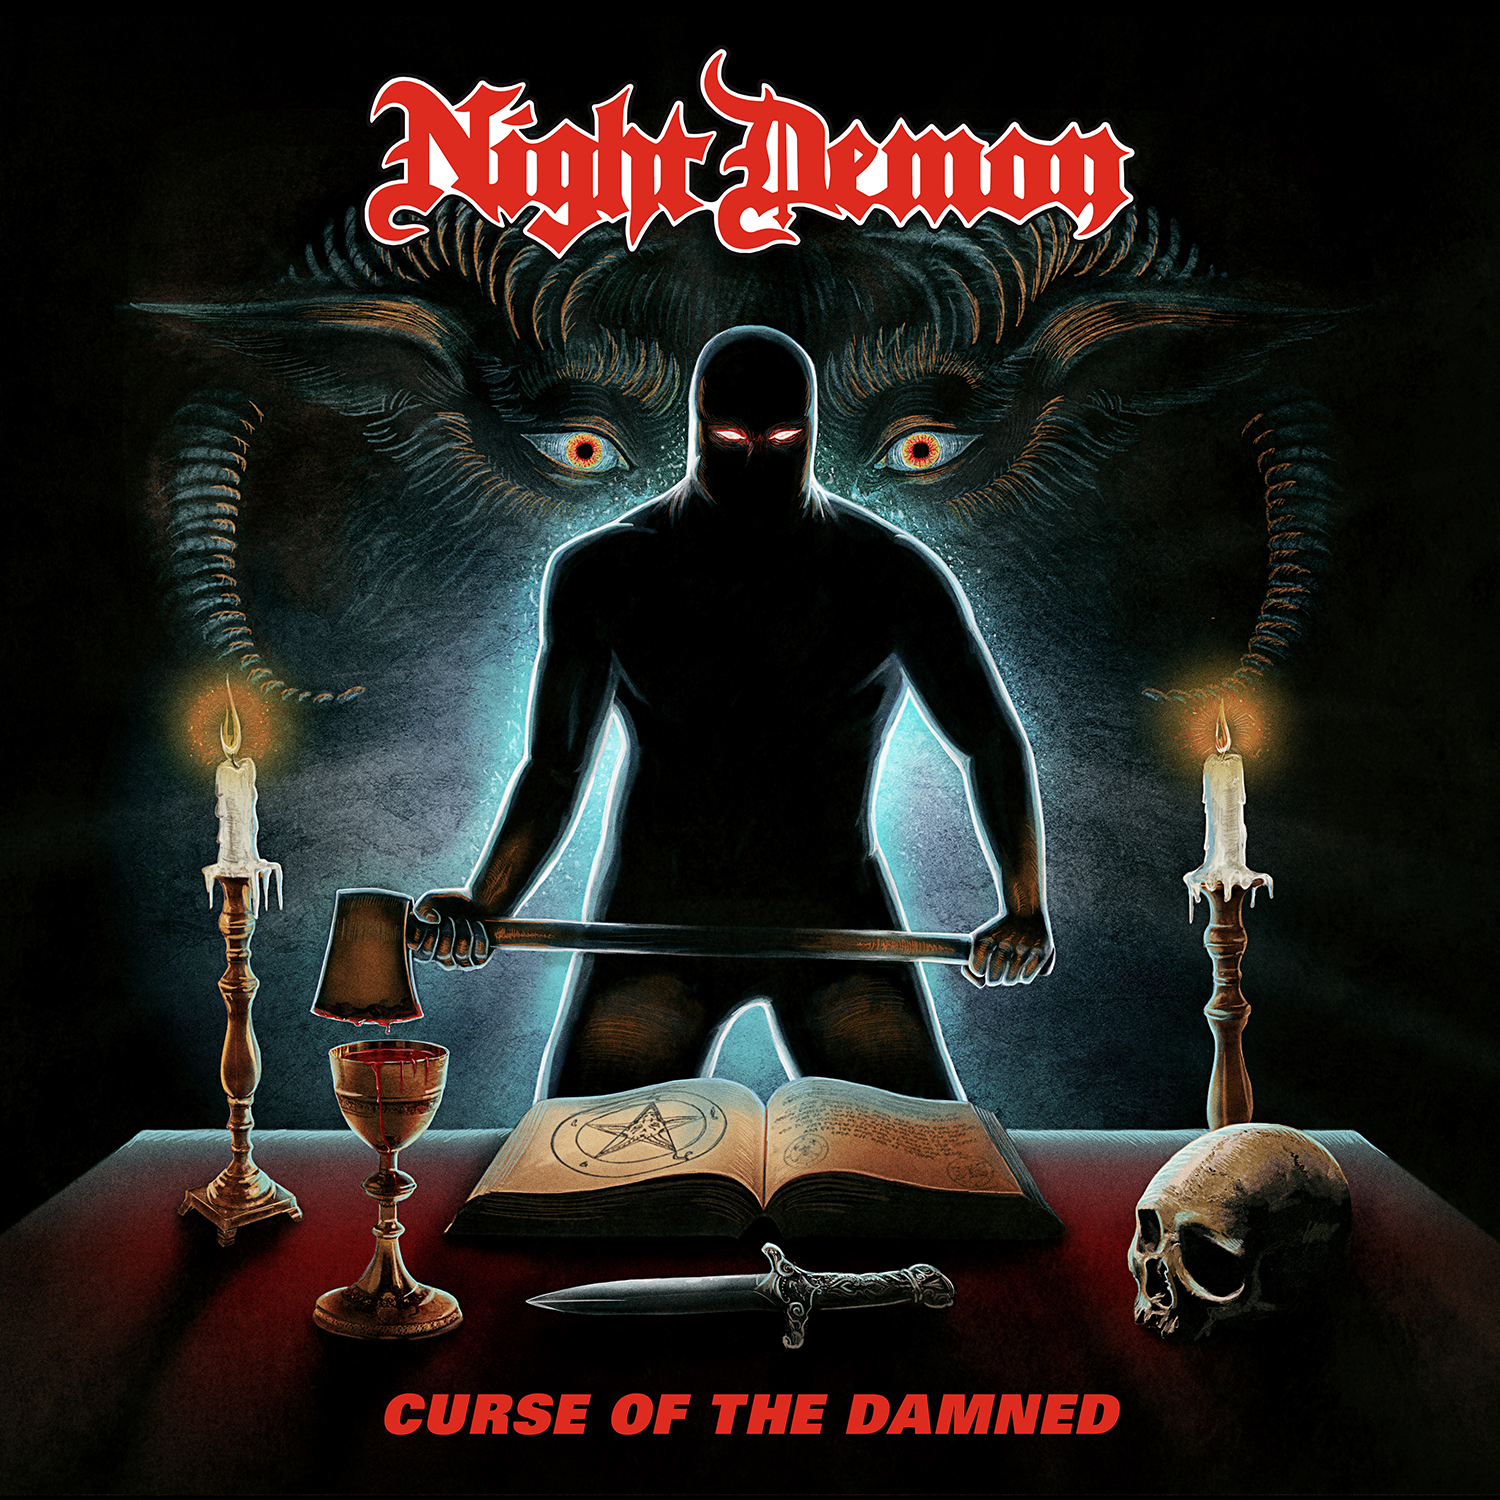 Curse of the Damned – Nightdemon